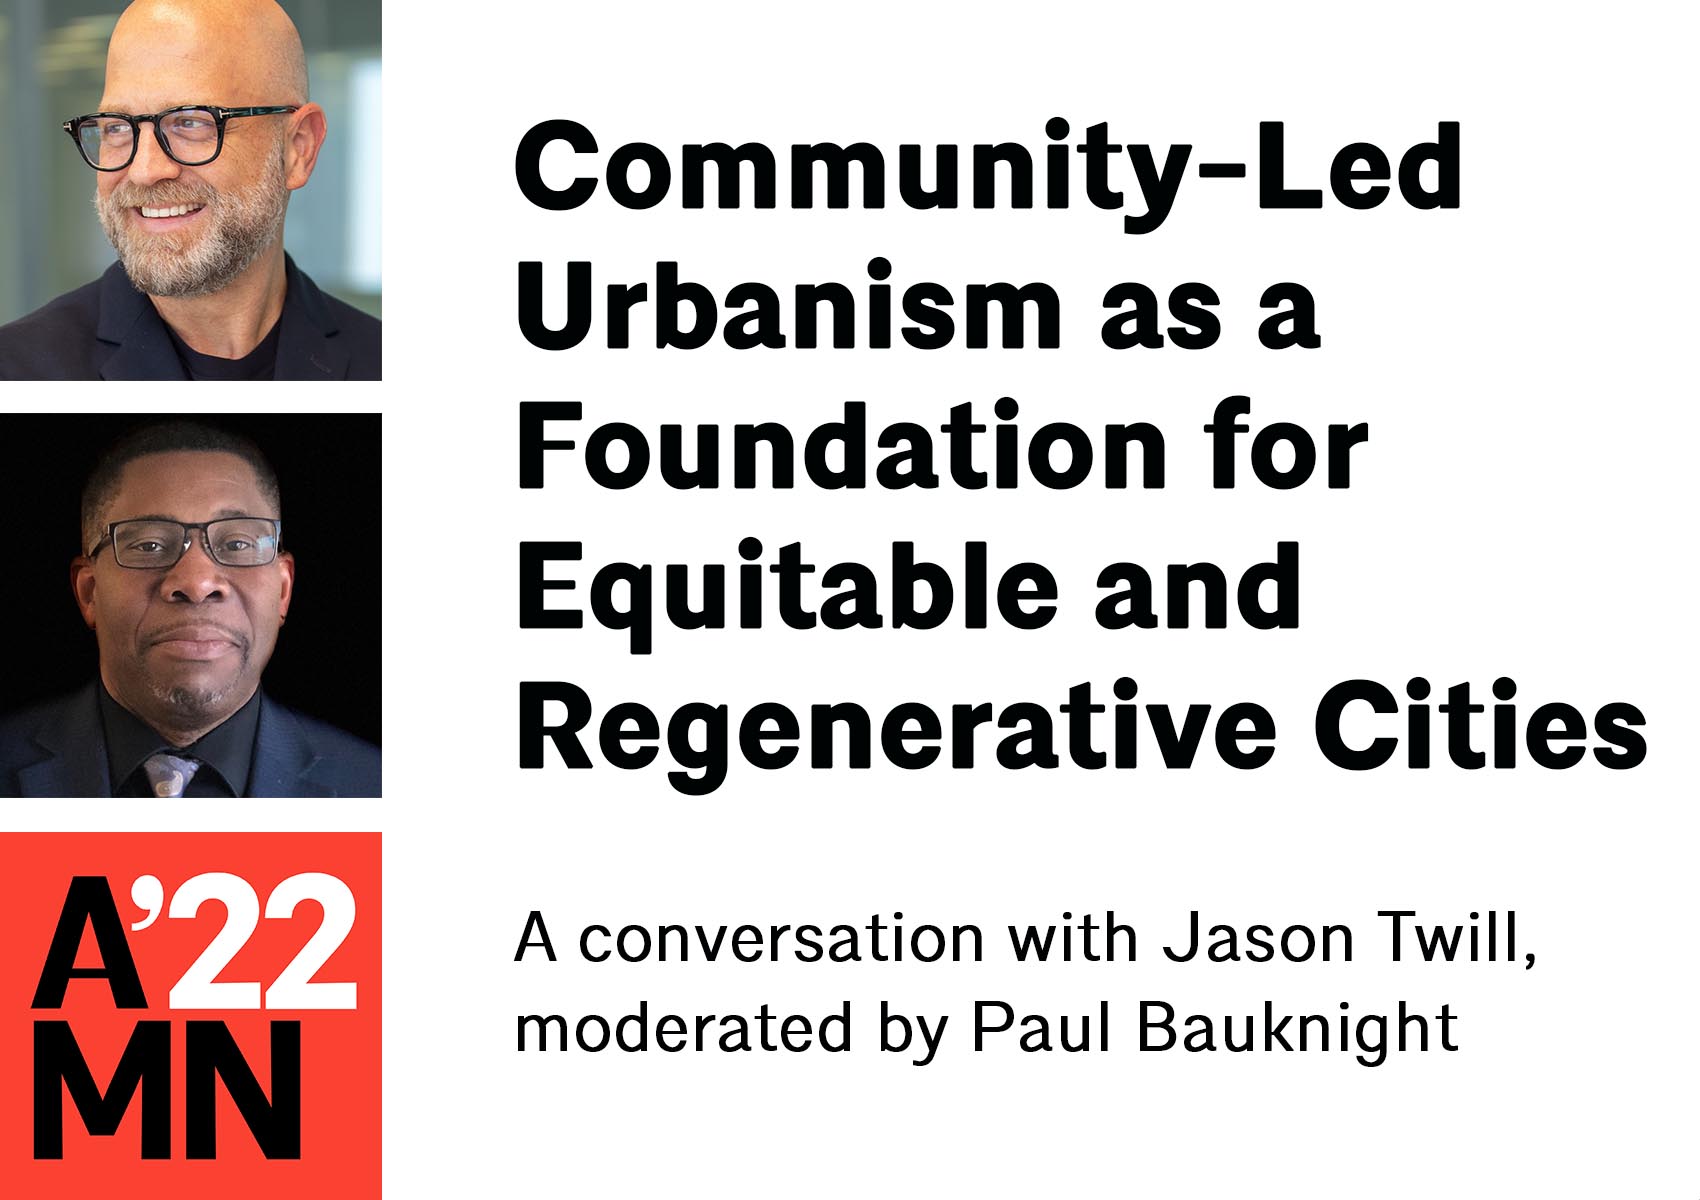 Community-Led Urbanism as a Foundation for Equitable and Regenerative Cities